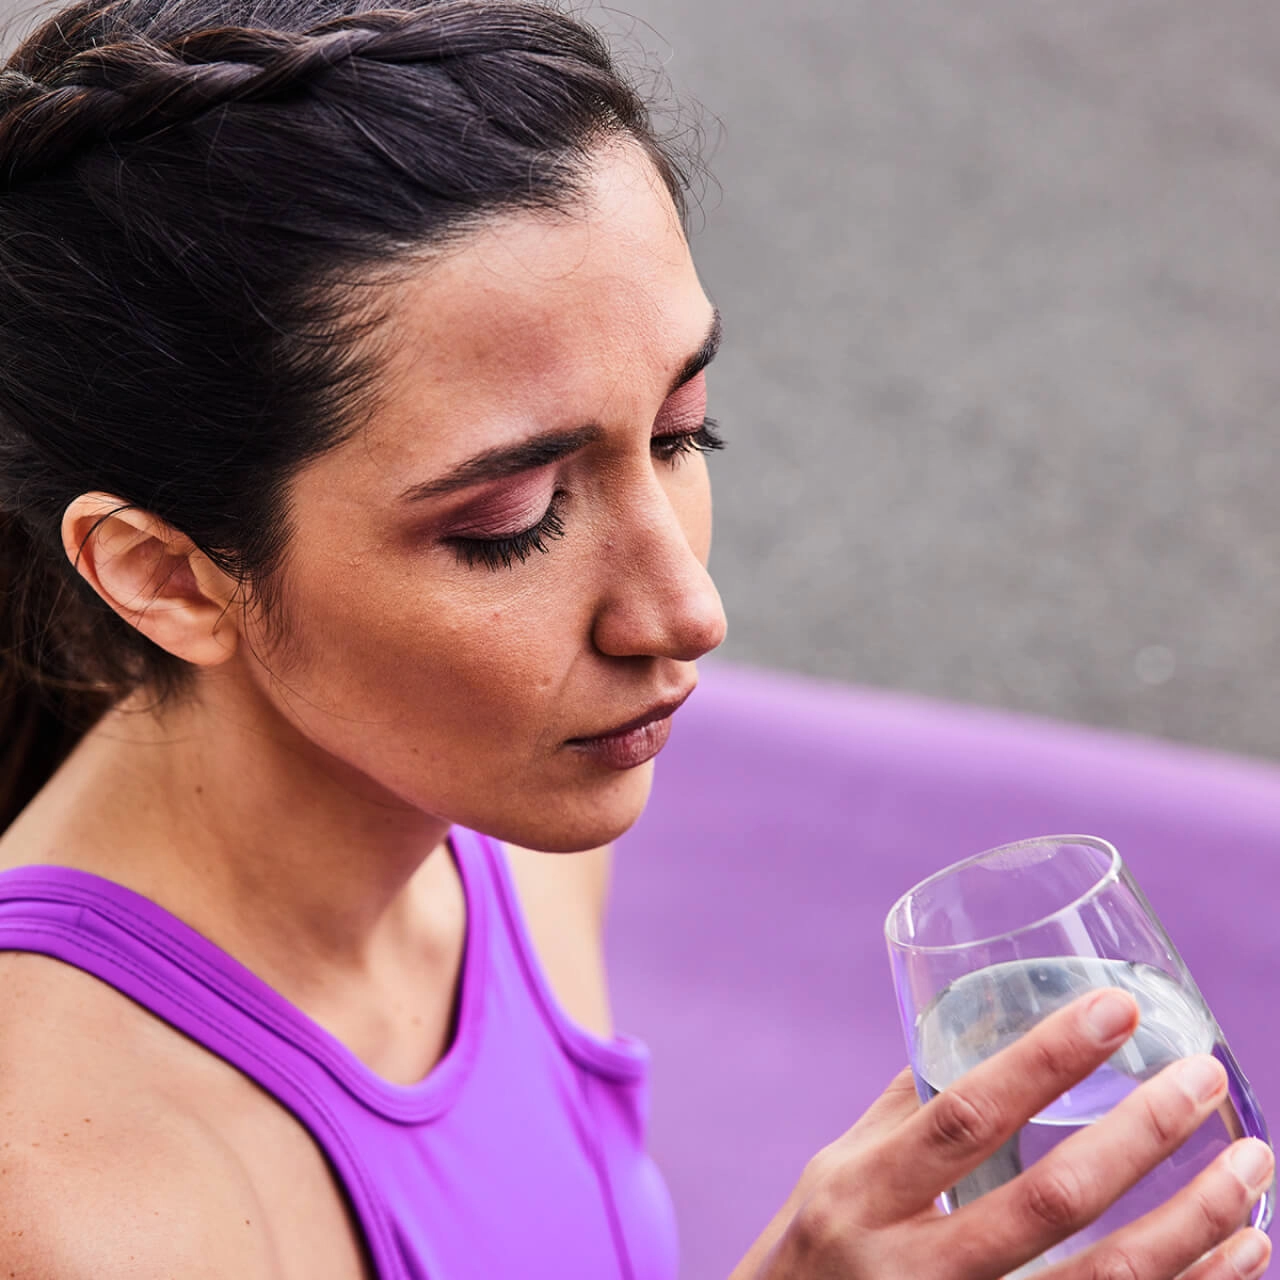 Athletic woman with glass of water